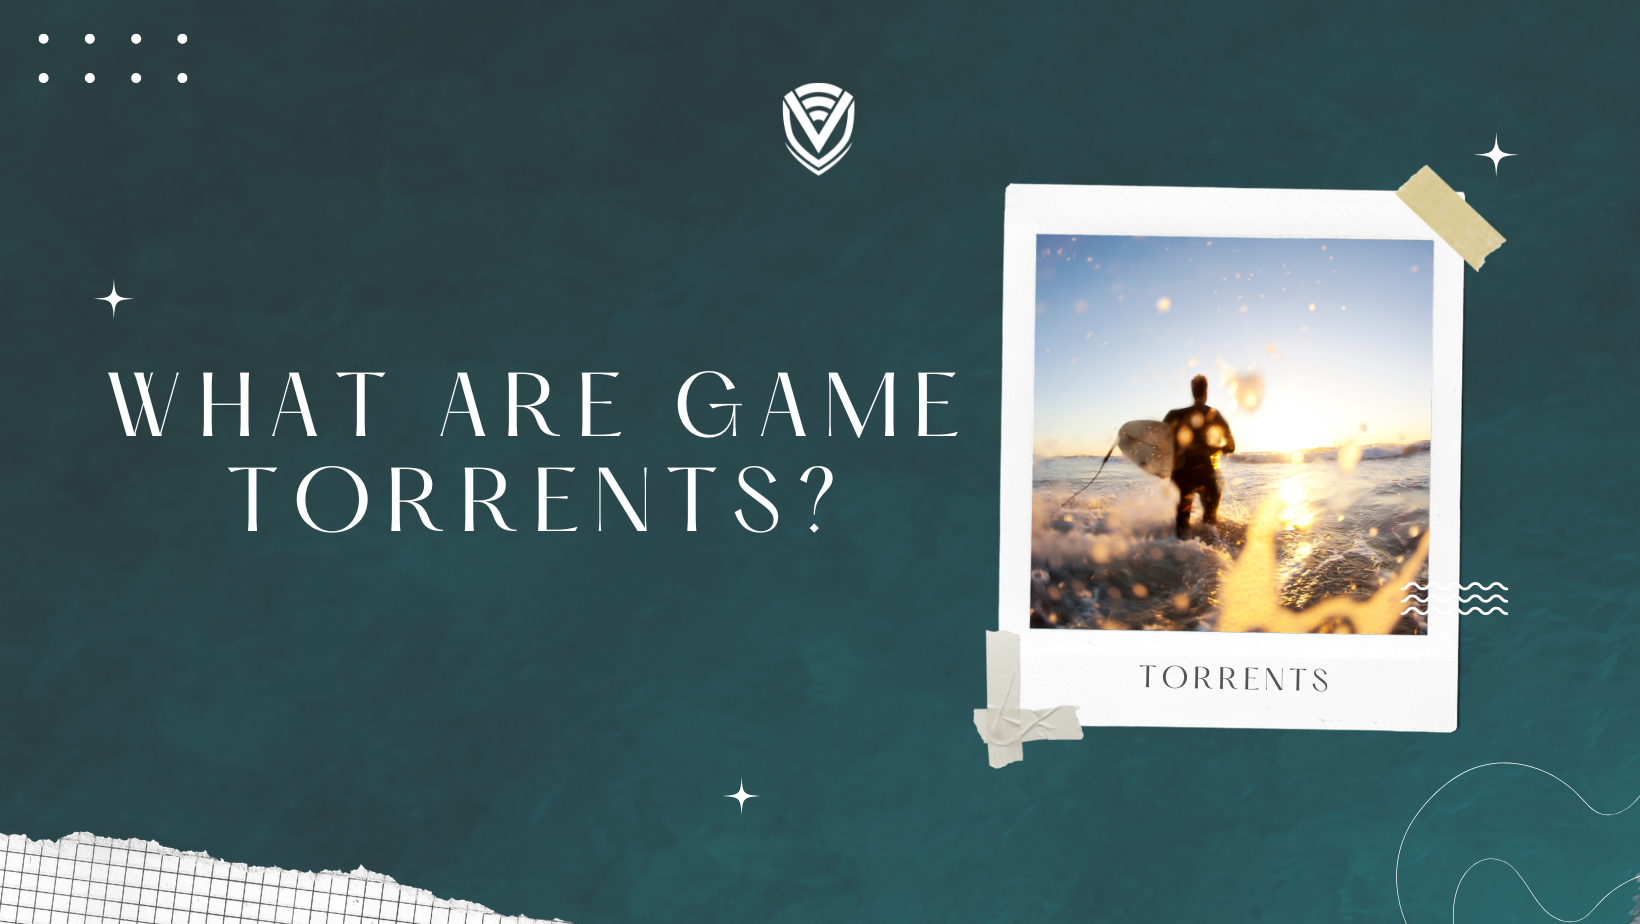 What are Game Torrents?